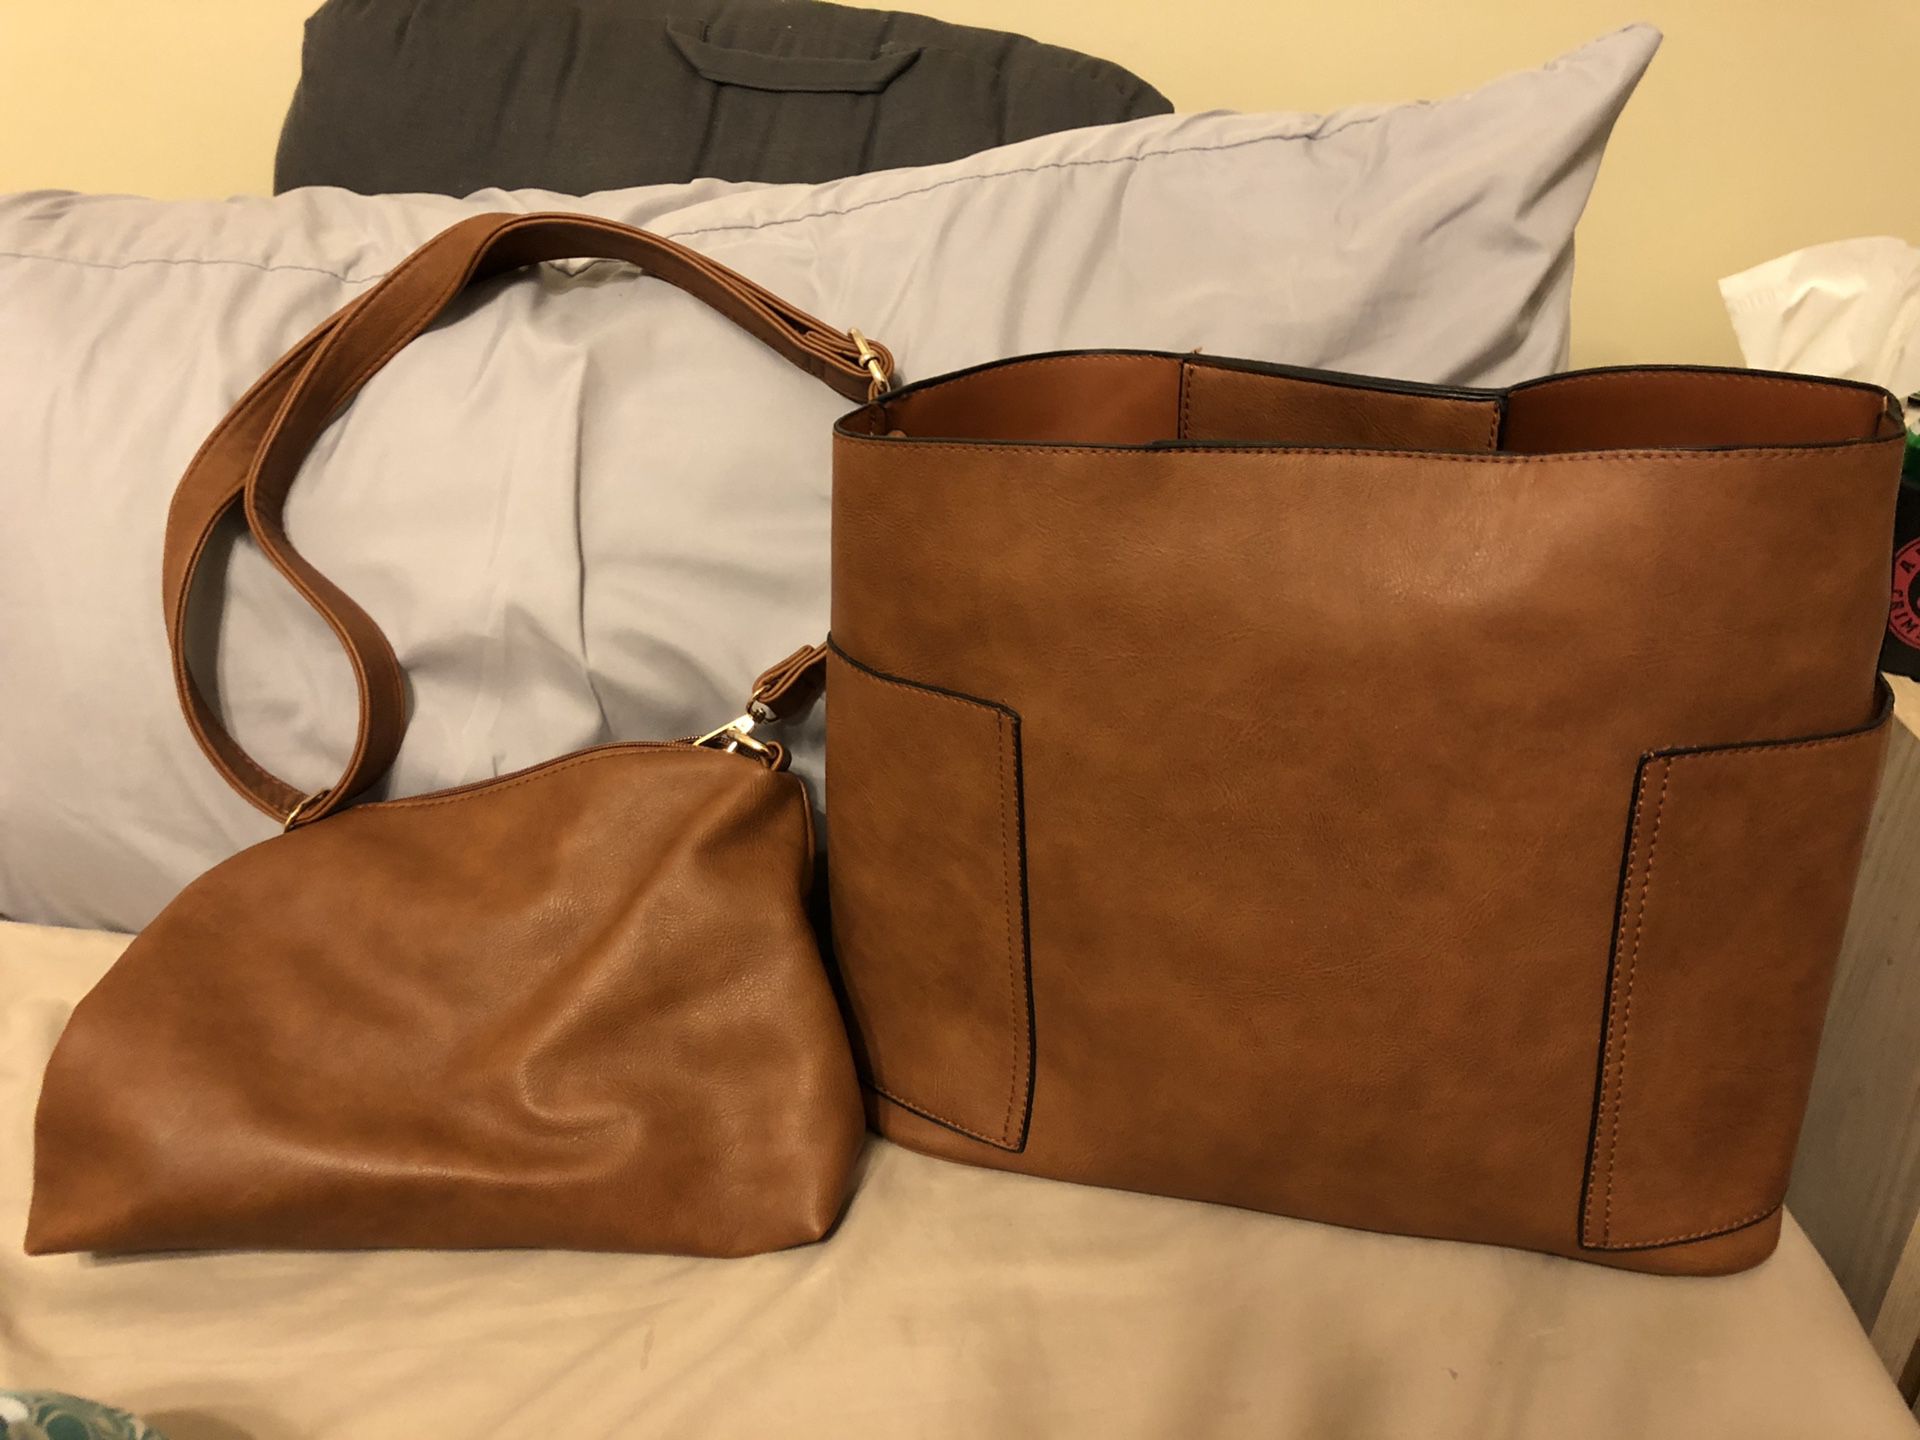 Large hand bag brand new. Comes with smaller purse also never used.